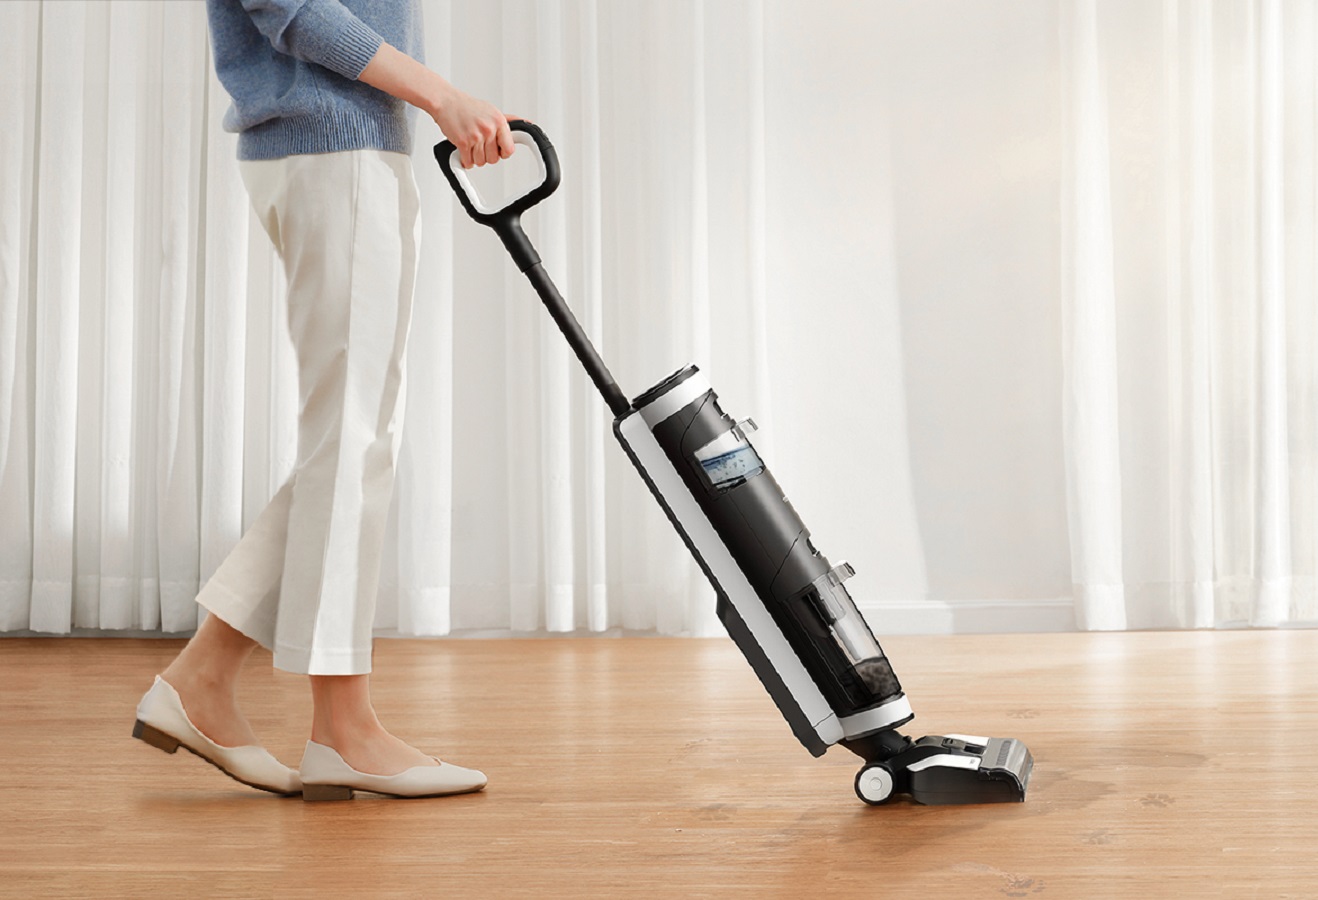 5 Best Cordless Vacuums for January 2022